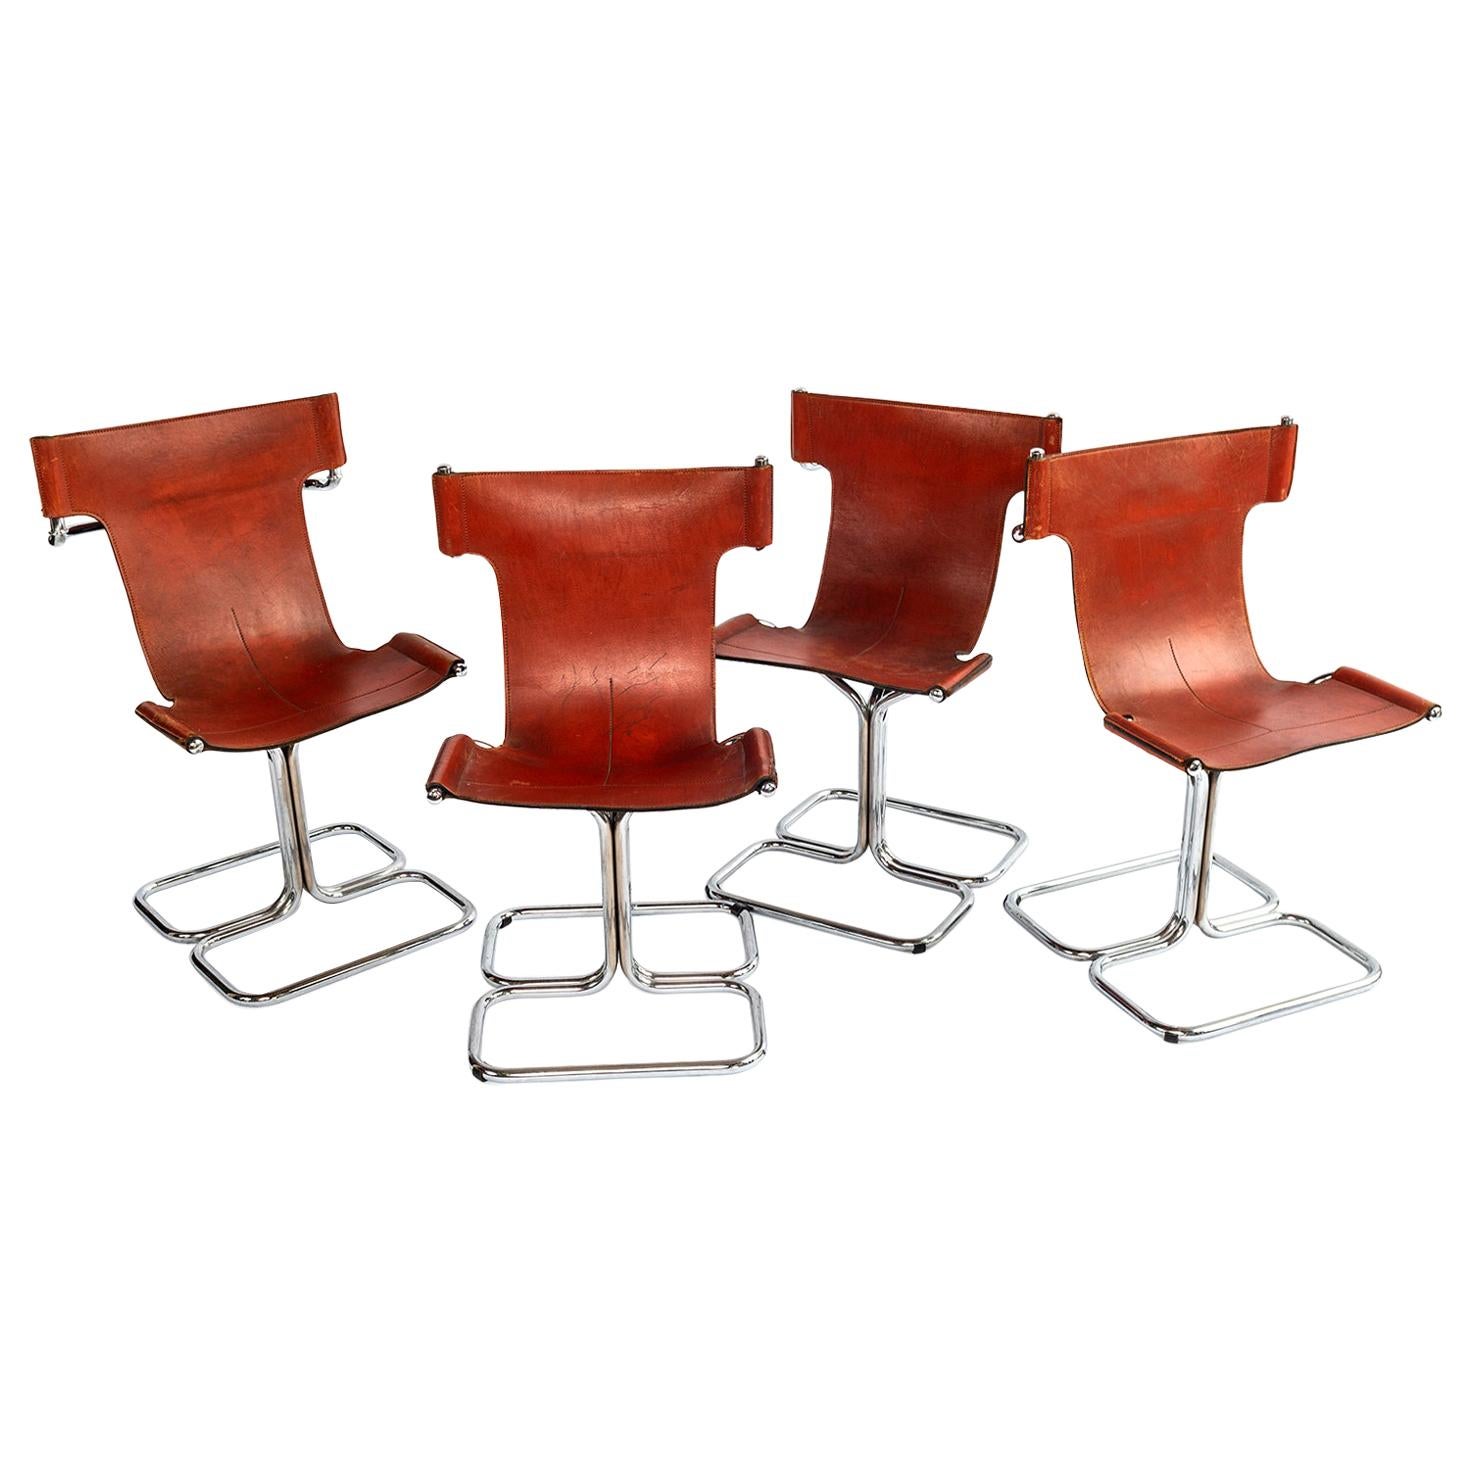 Set of Four Mid-Century Modern T Chairs in Chrome and Cognac Leather.